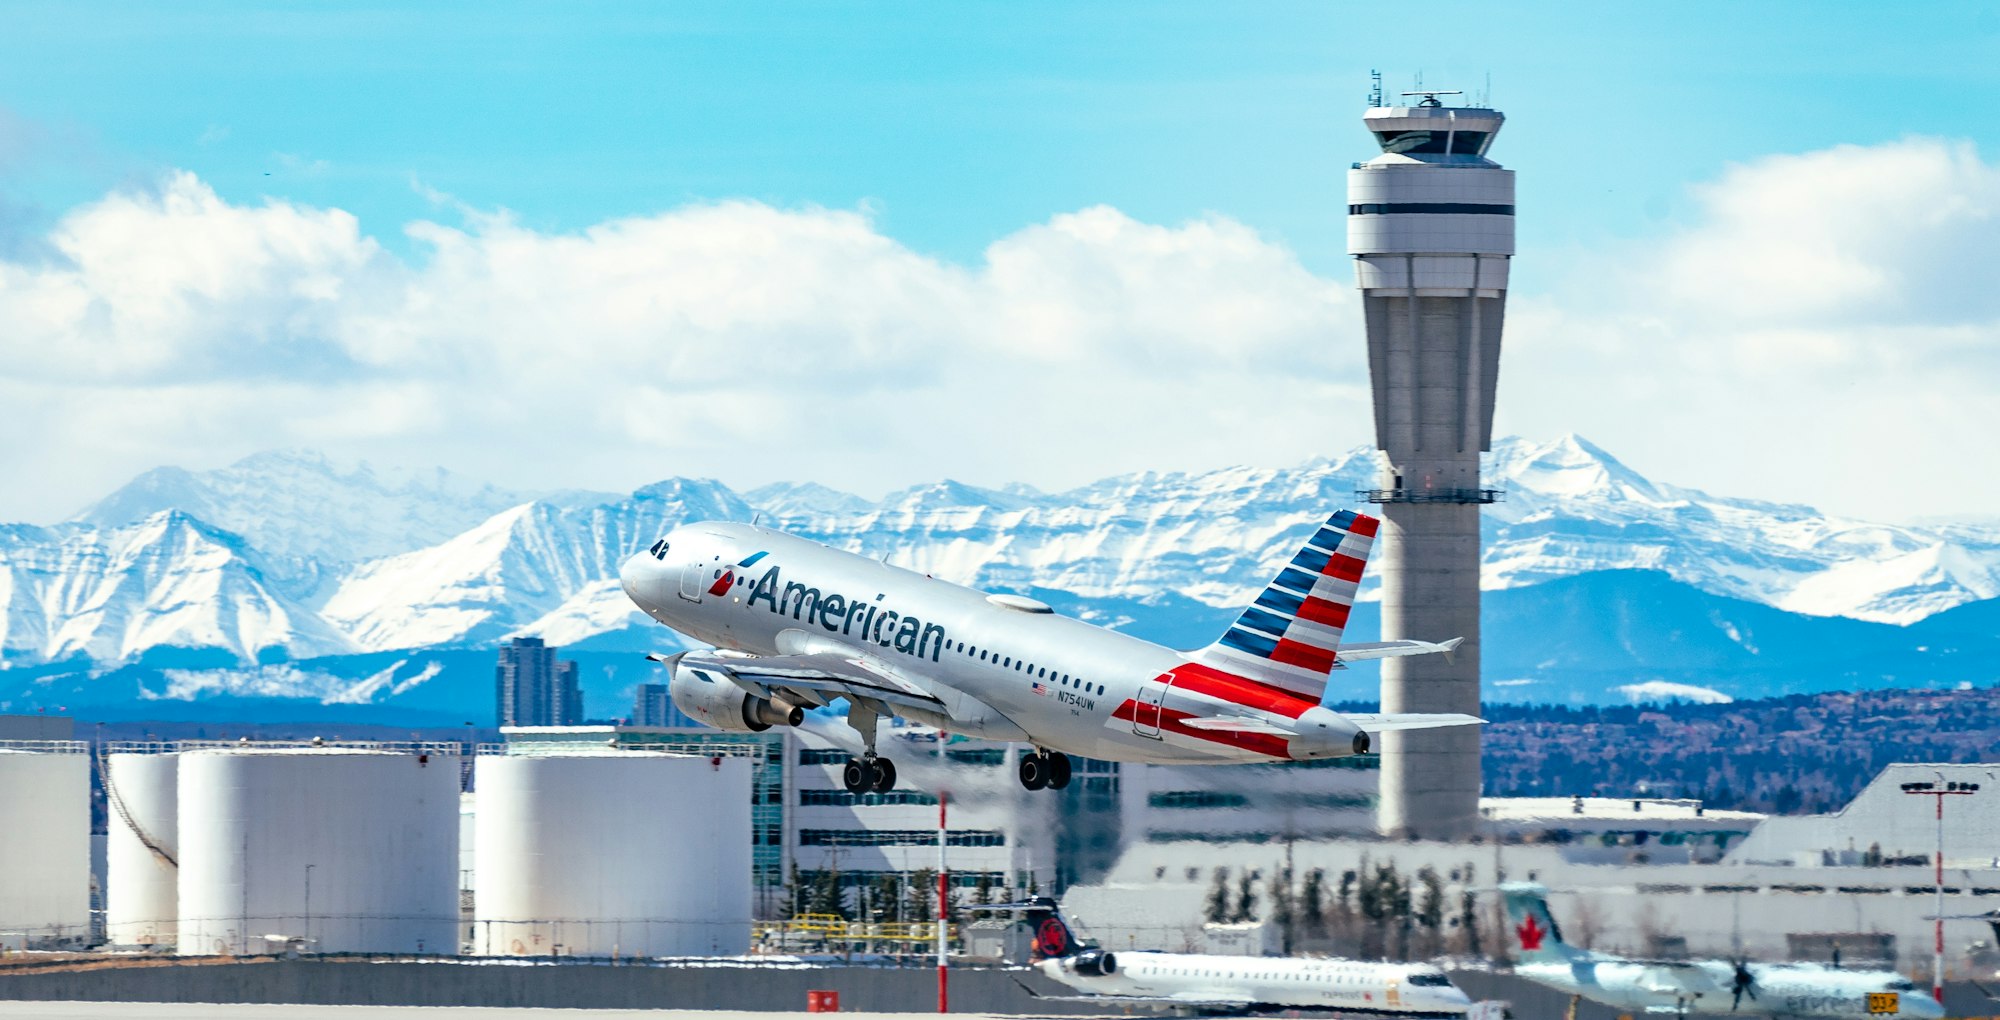 American Airlines to Expand High-Speed Wi-Fi to Nearly 500 Regional Aircraft